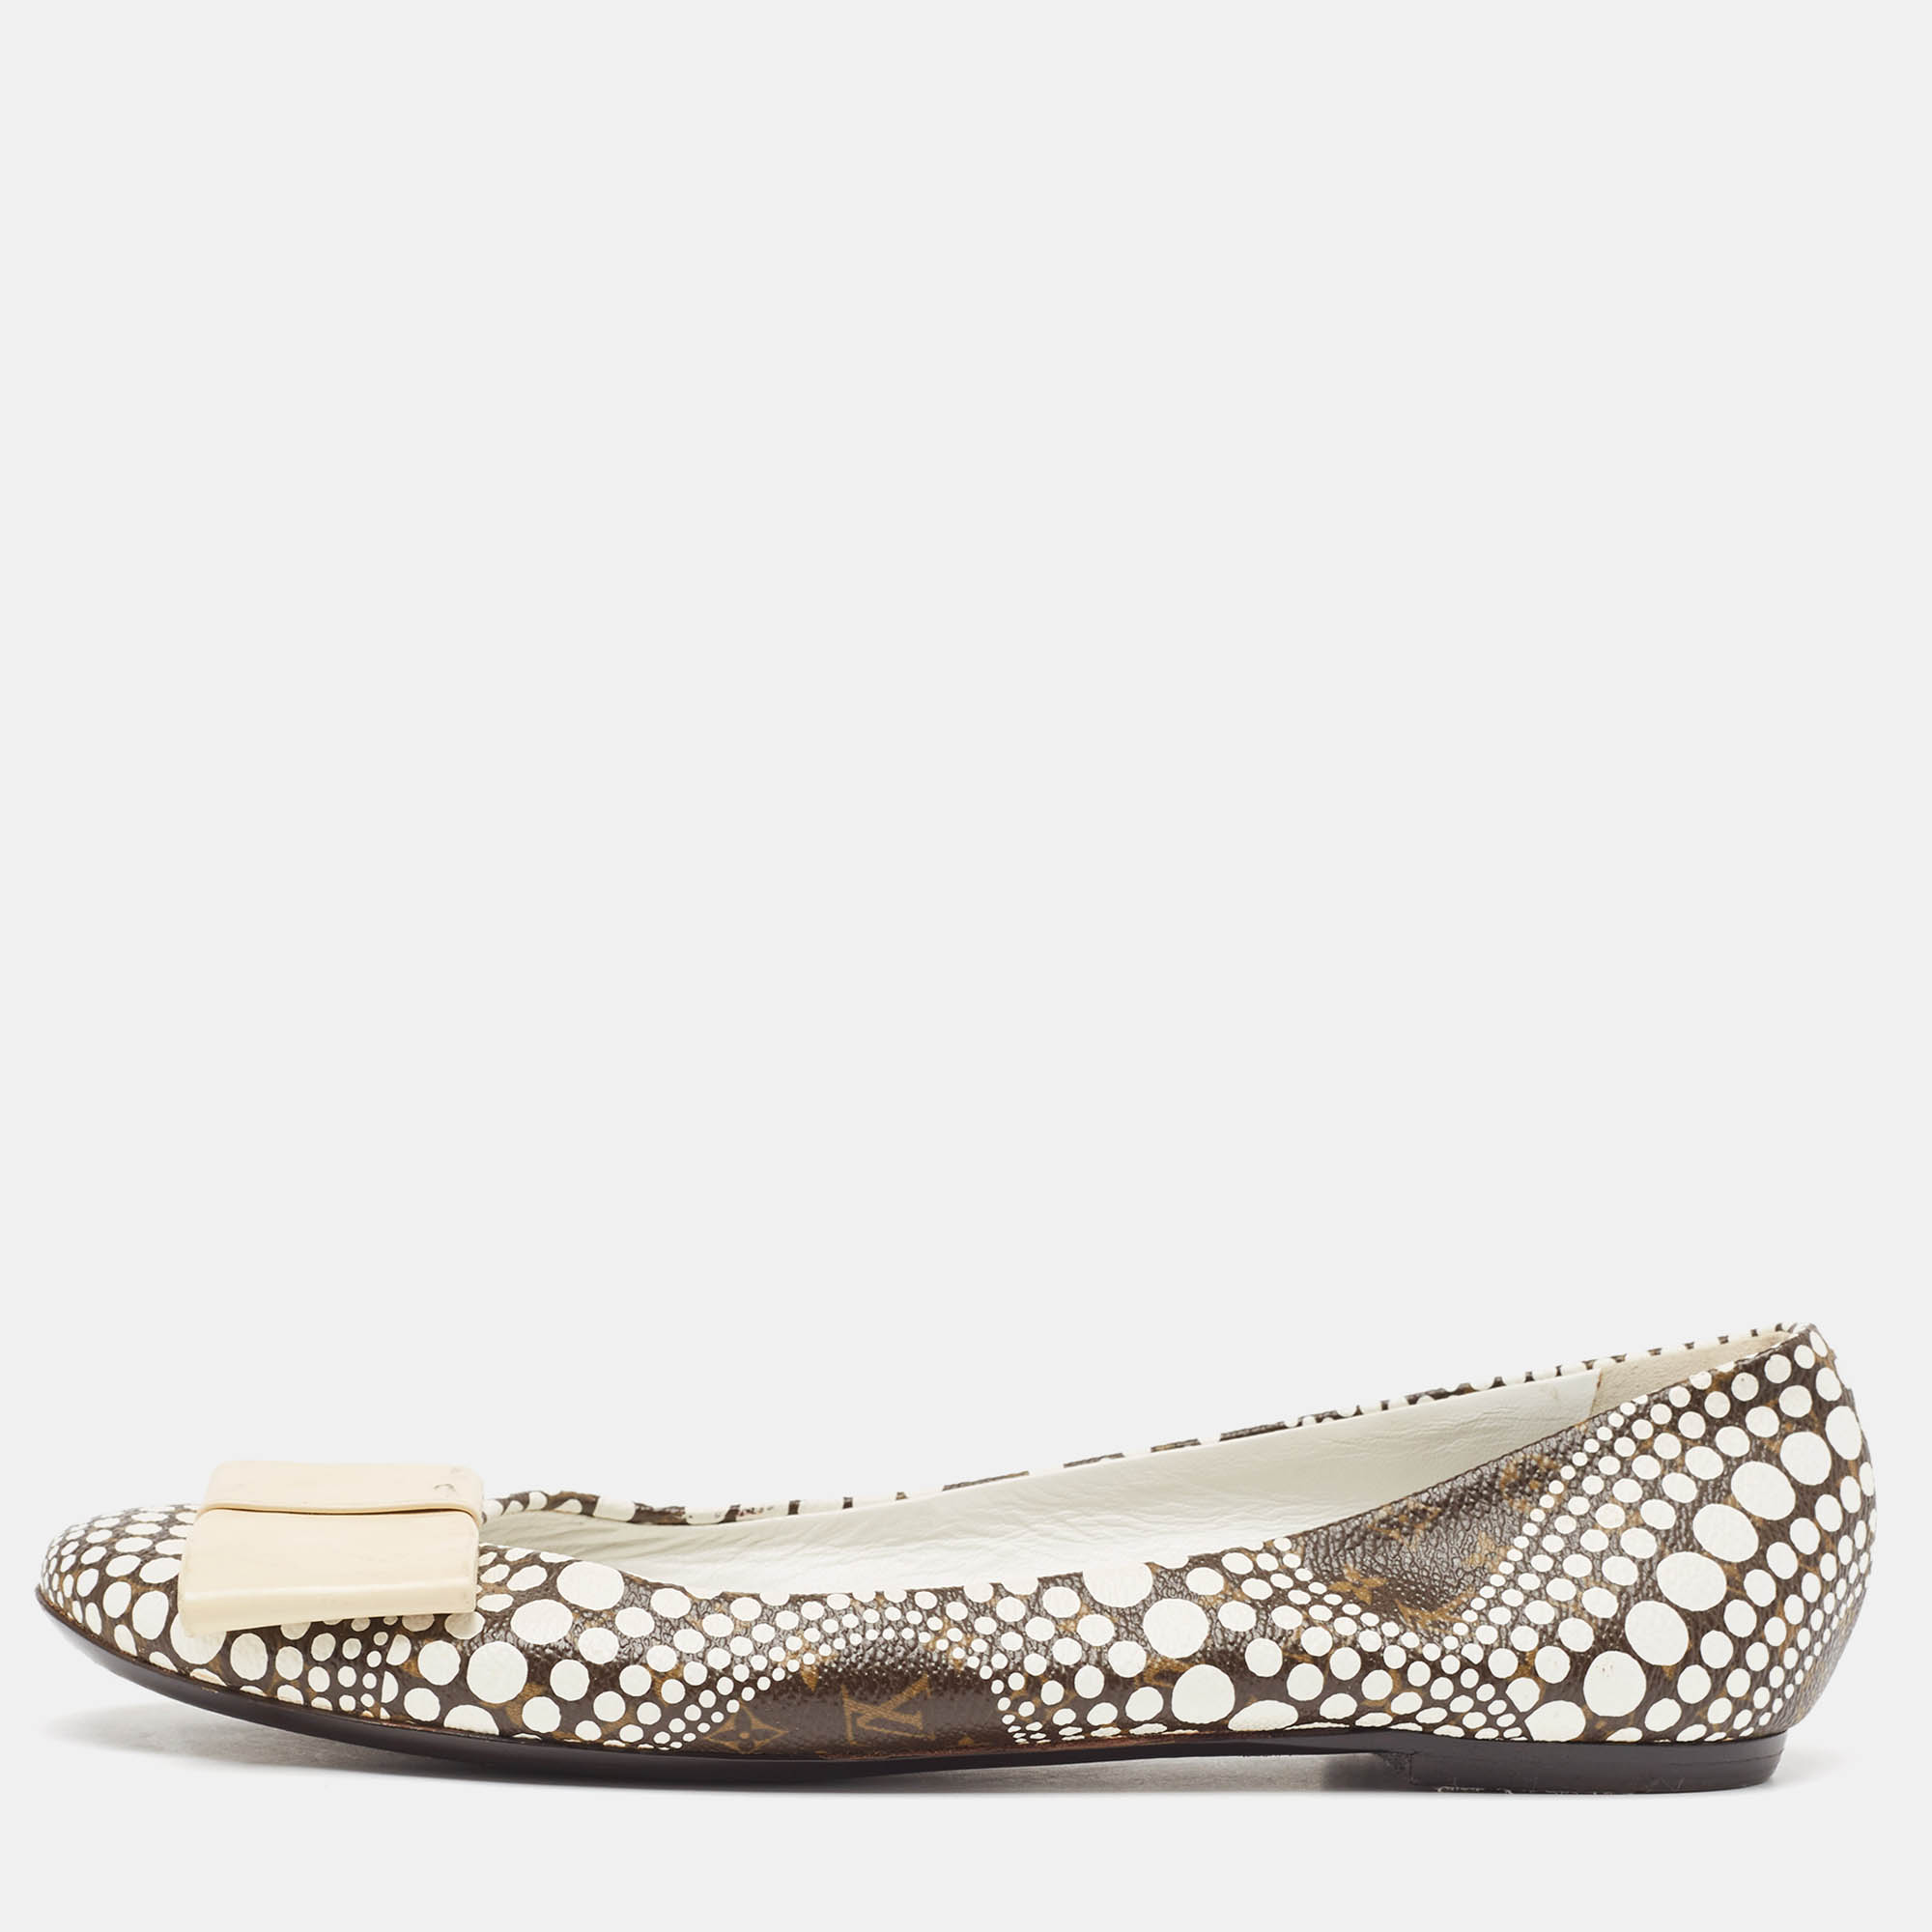 Pre-owned Louis Vuitton X Yayoi Kusama White/brown Monogram Canvas Limited Edition Ballet Flats Size 38.5